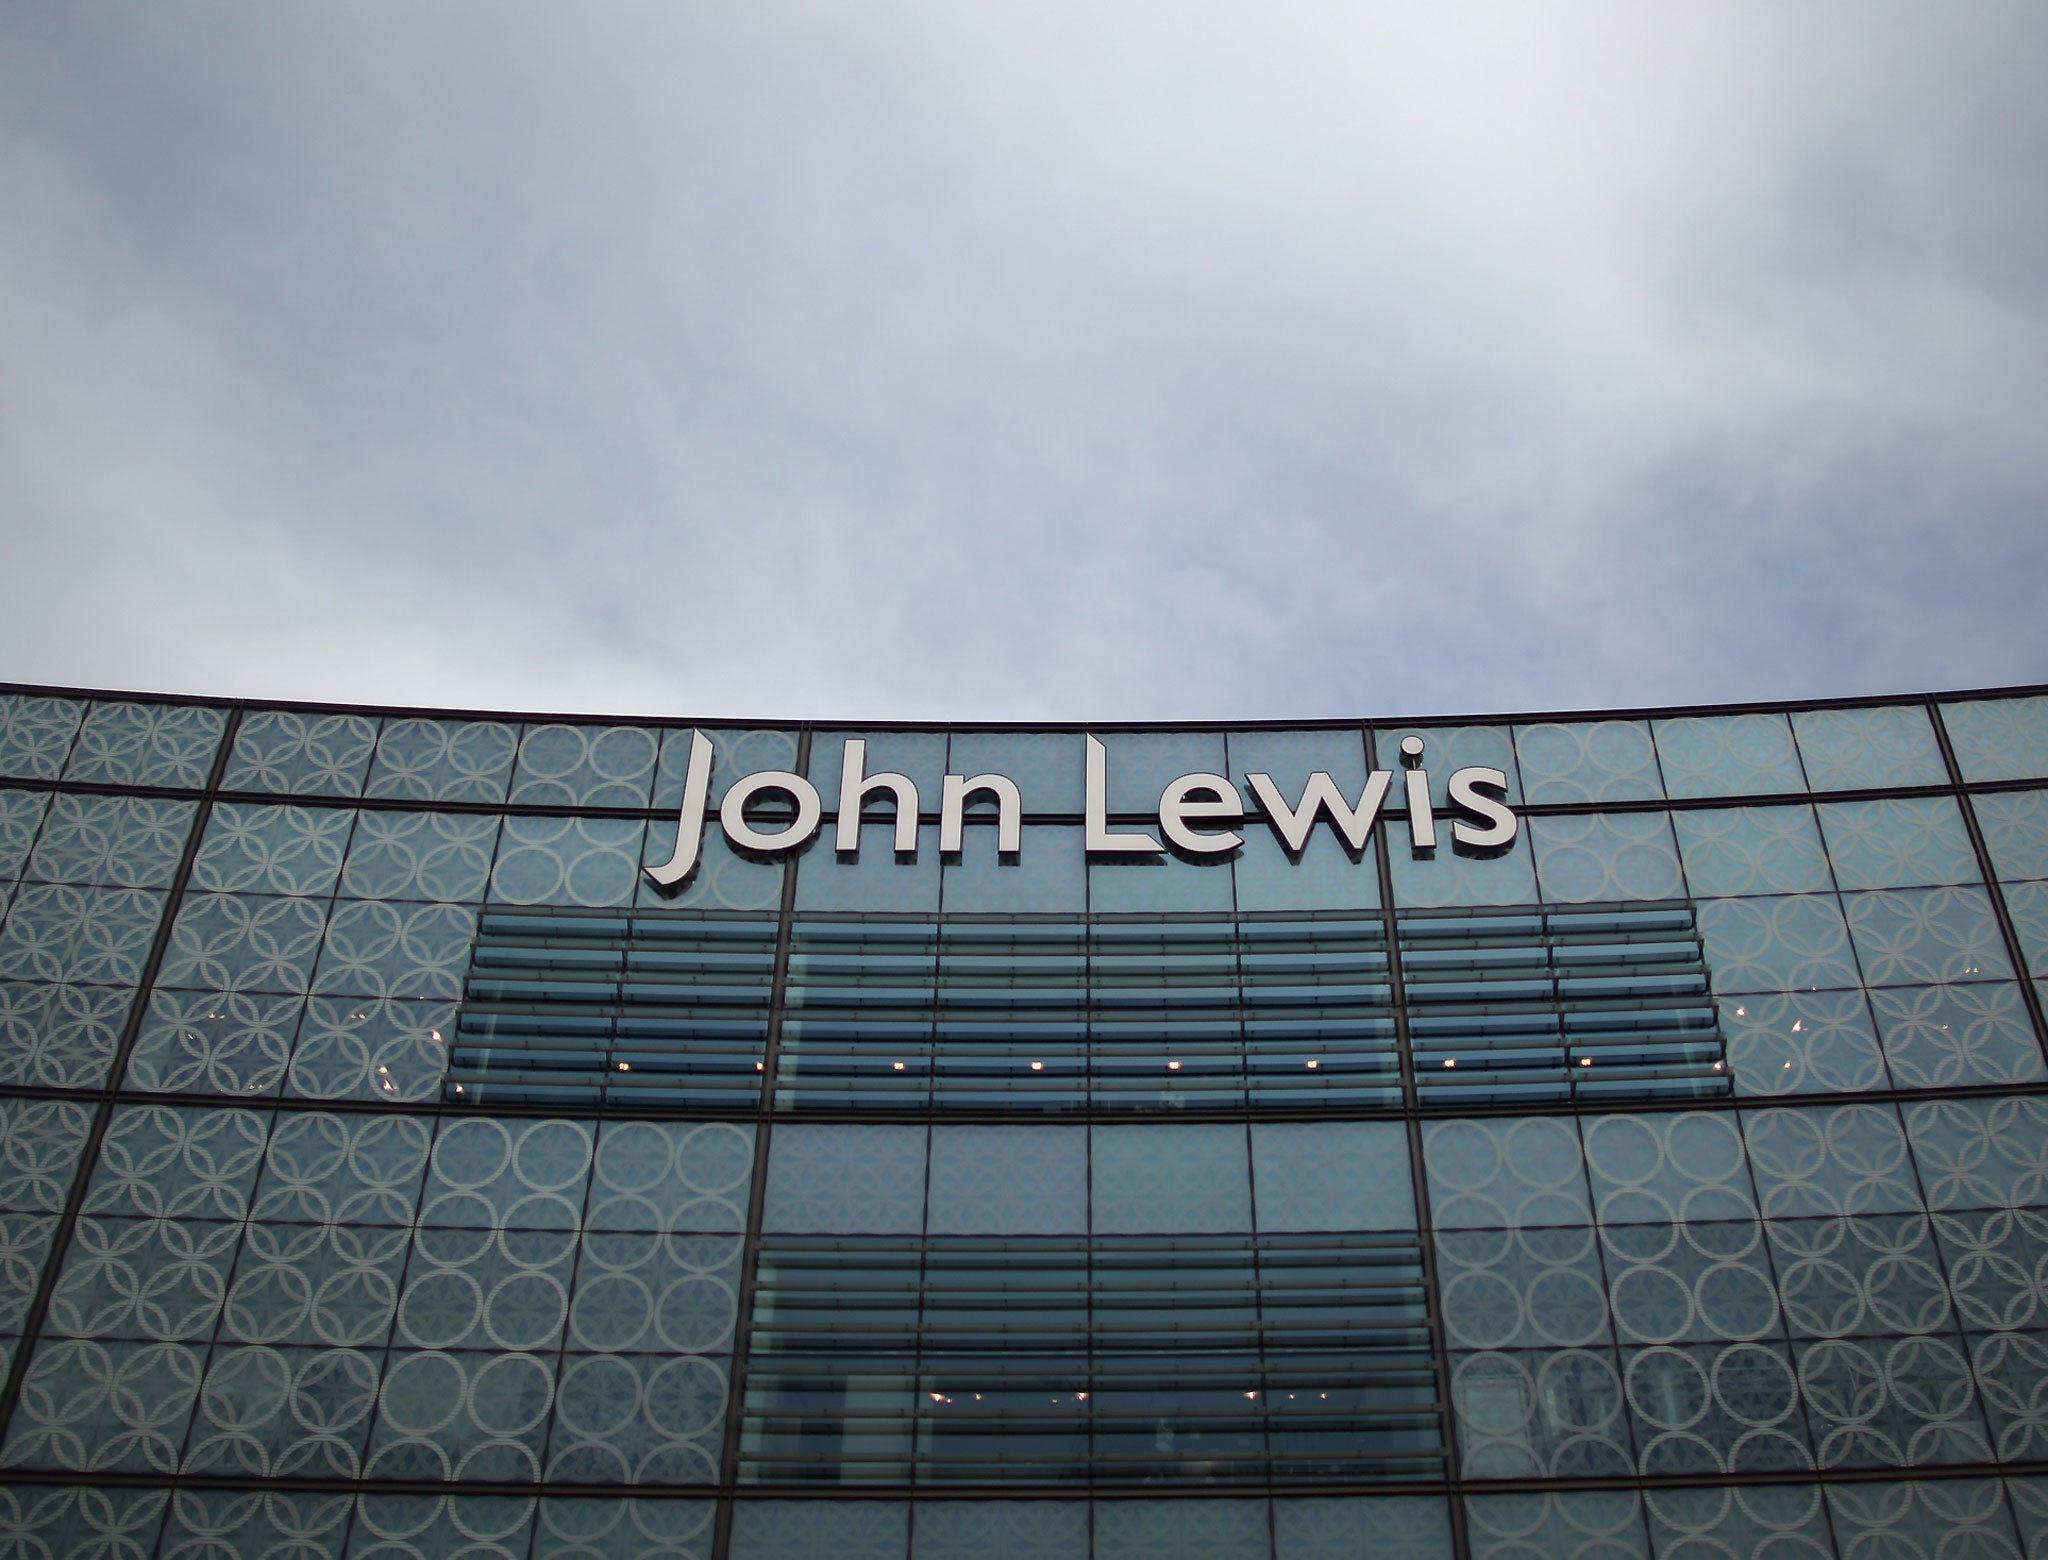 John Lewis at Westfield shopping centre